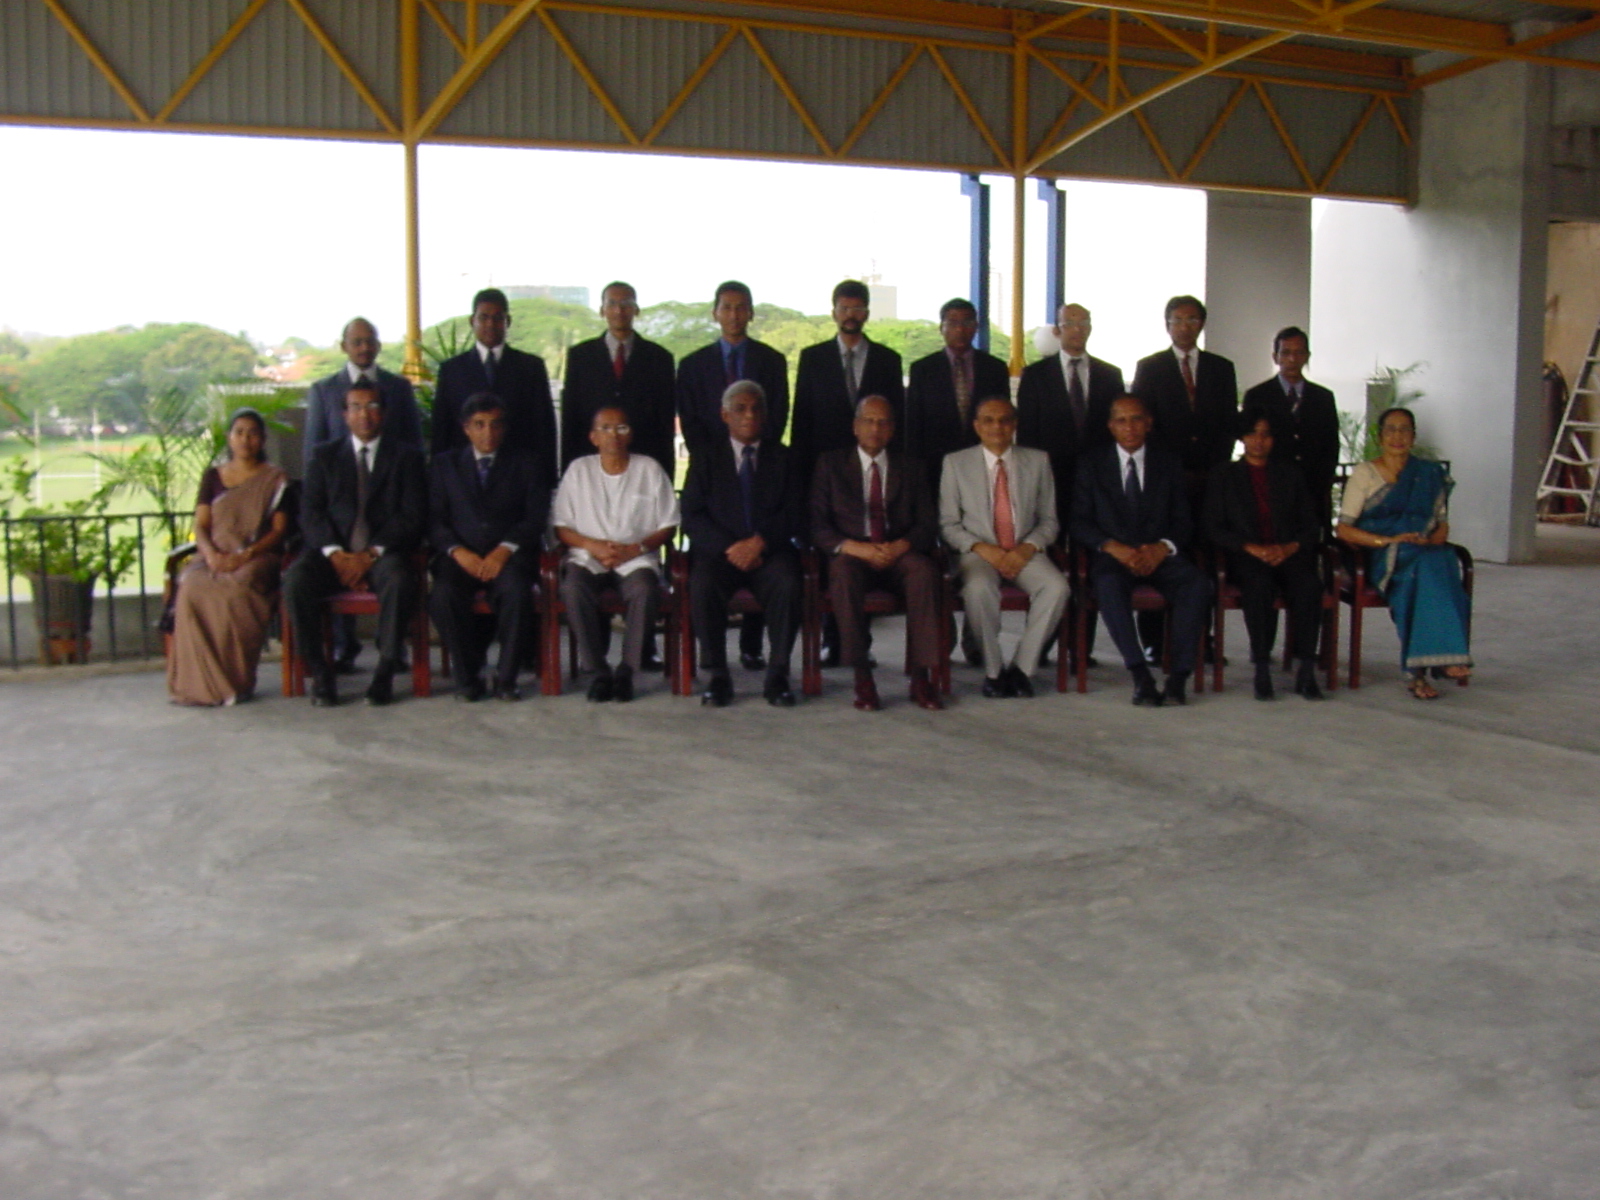 The Board of Management of the University of Colombo School of Computing after the last meeting of the Board, May 2004 attended by Prof. Samaranayake as Director